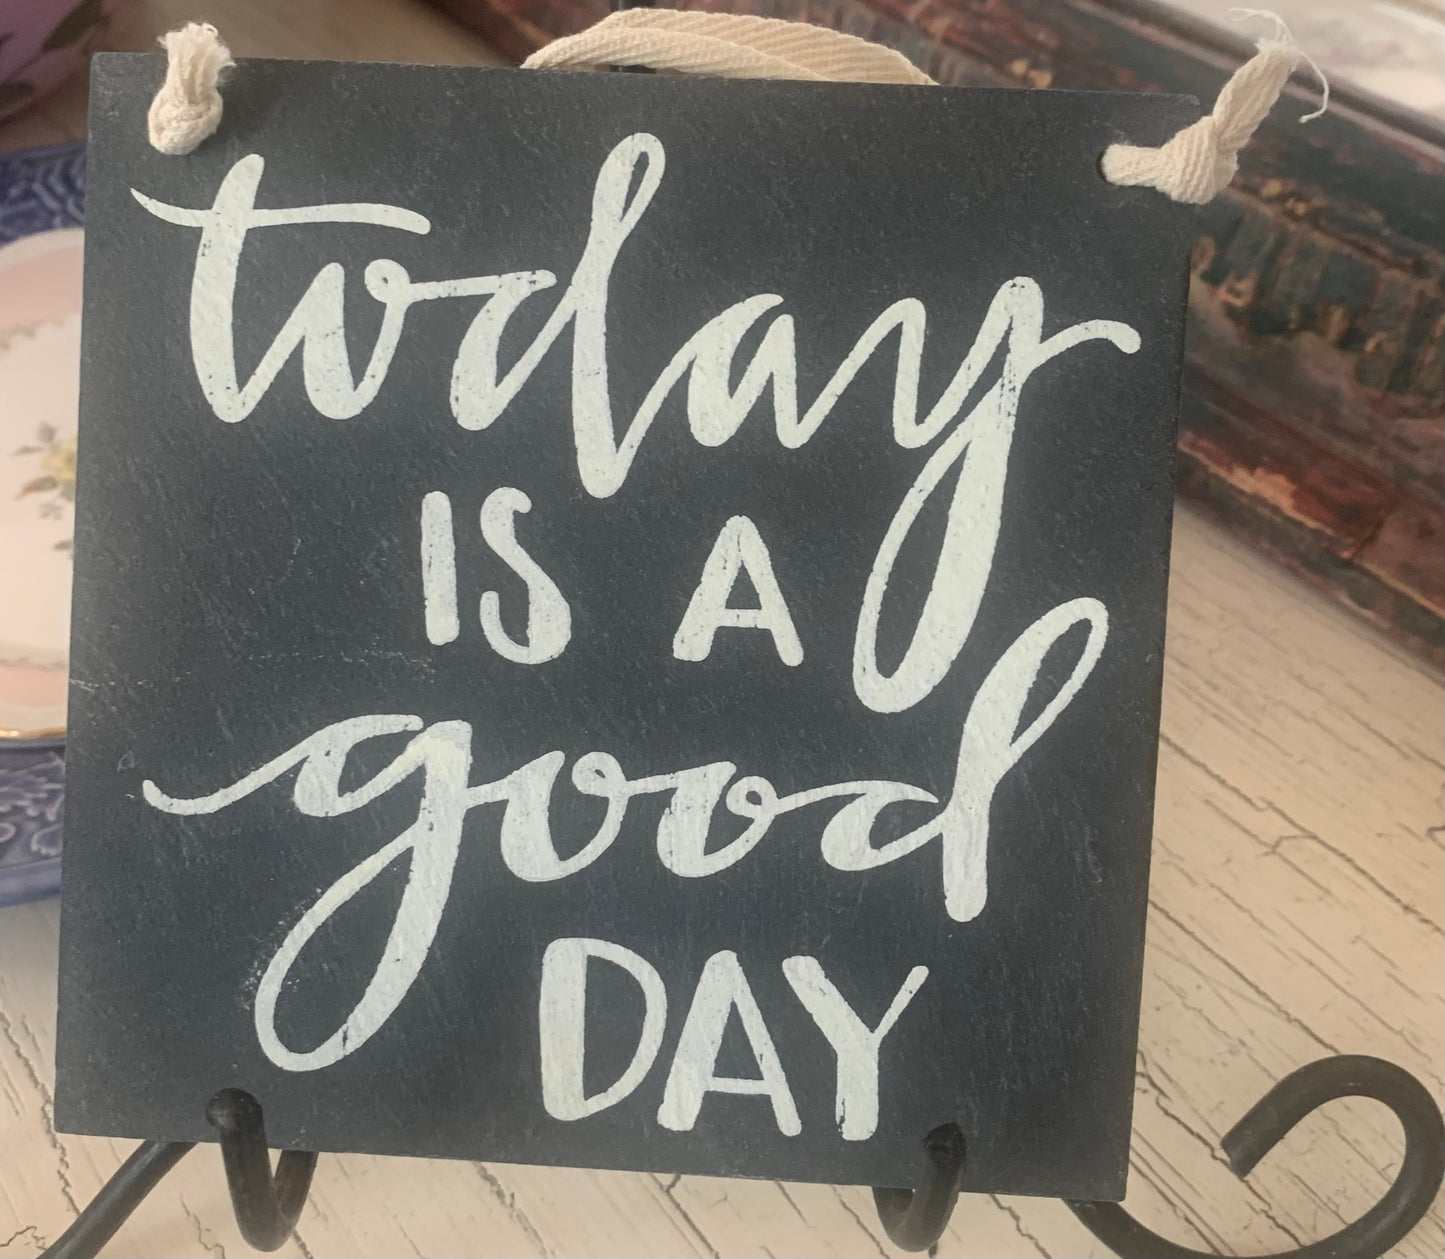 Today is A Good Day Hanging Slate Sign